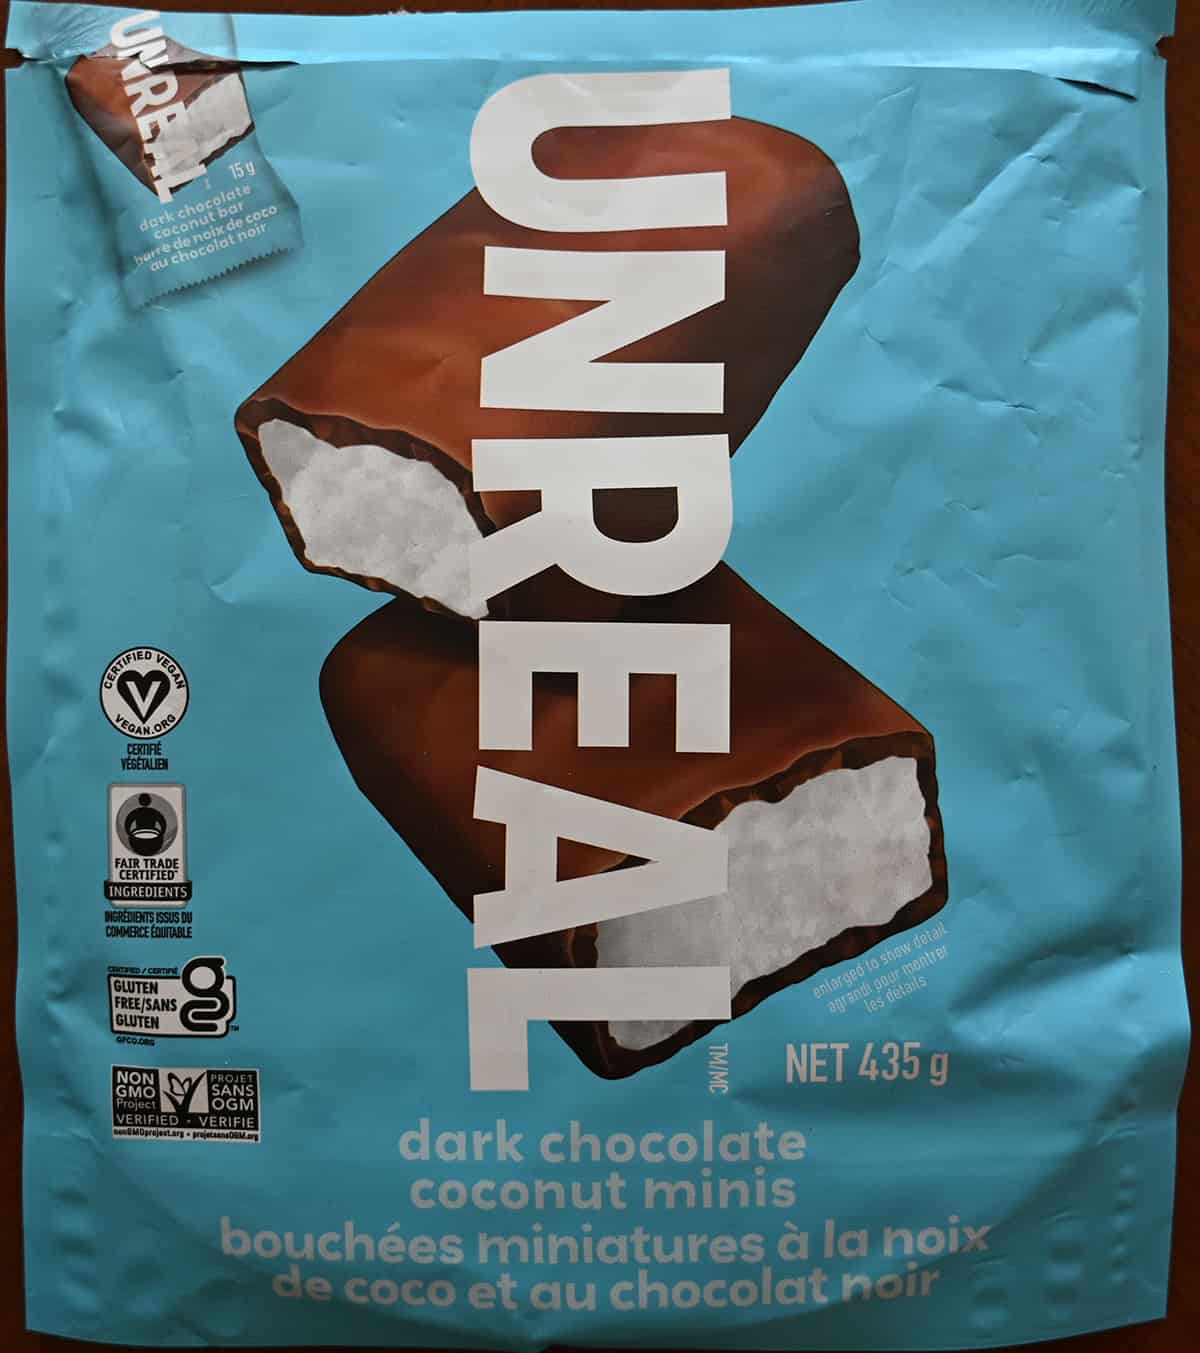 Closeup image of the front of the bag of dark chocolate coconut minis showing the weight of the bag and that they're fair trade certified and Non-GMO certified.